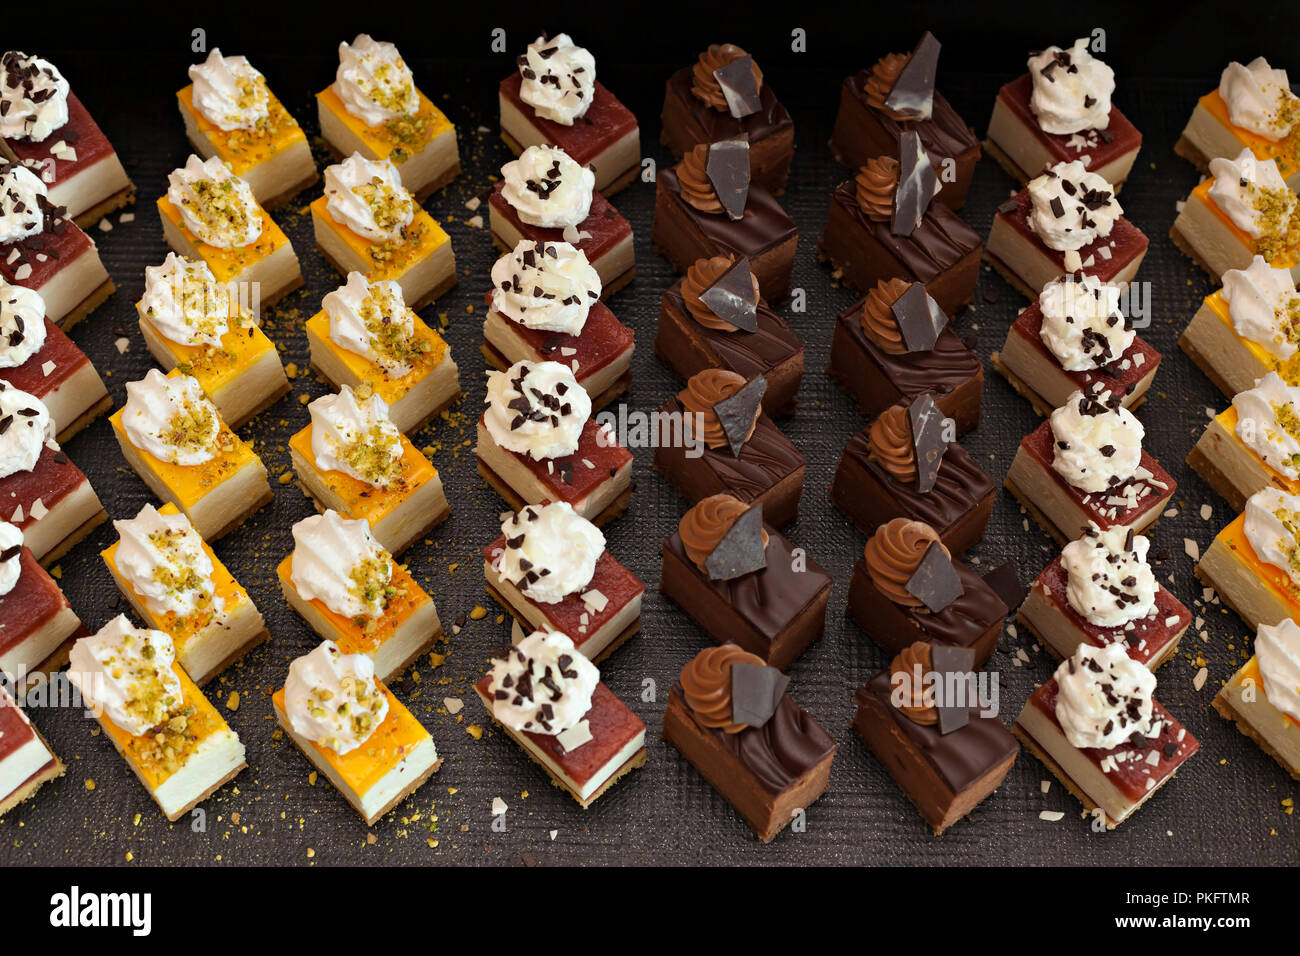 Small chocolate and vanilla layered cakes in rows on candy buffet. Sweet paradise. Stock Photo